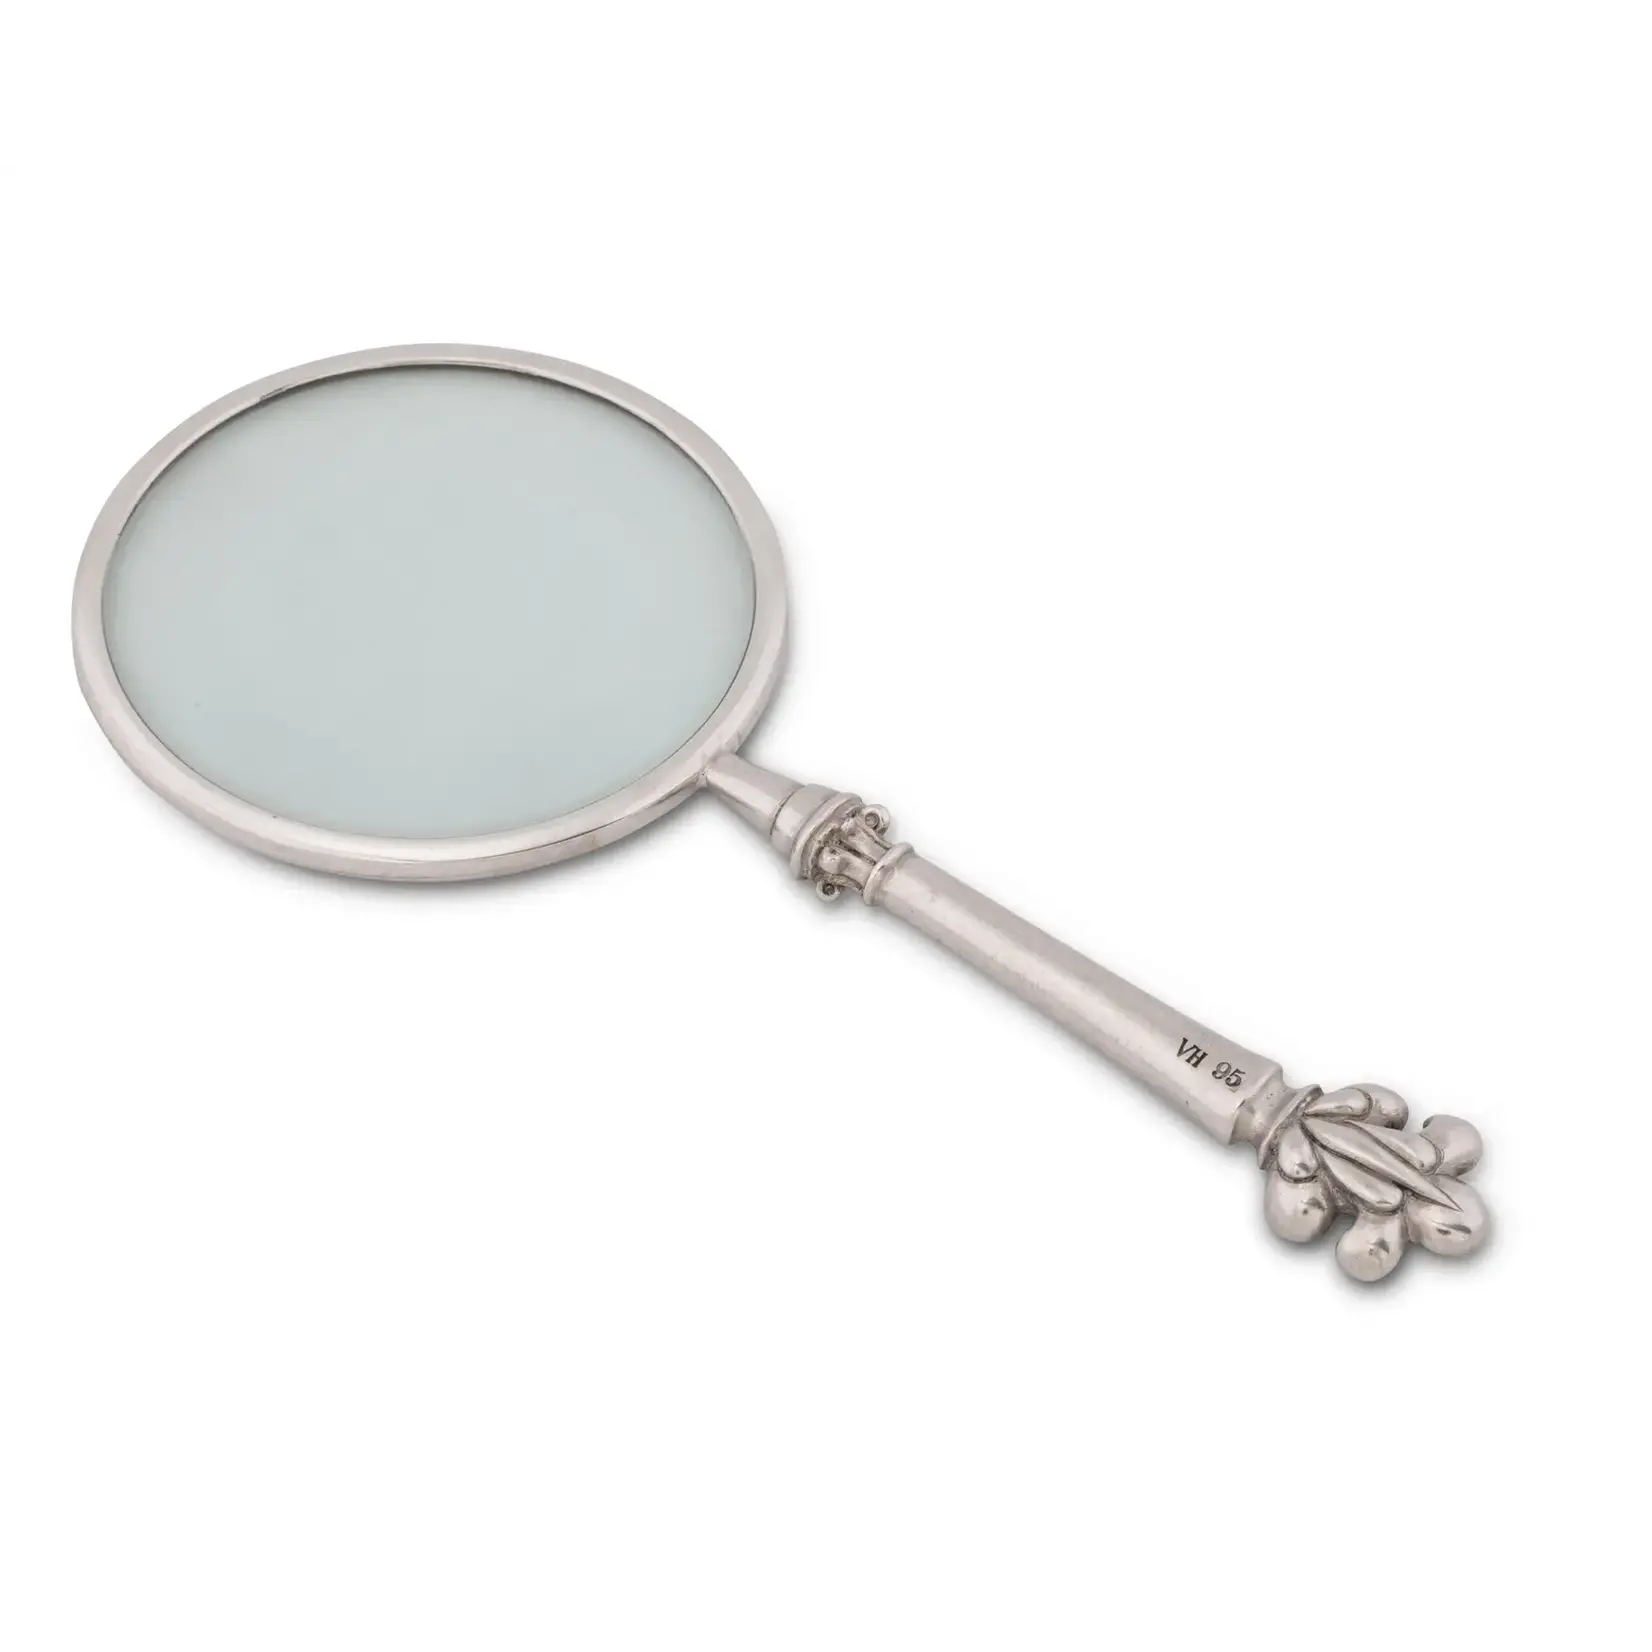 Vagabond House Pewter Provencal Pattern Magnifier 4 inches